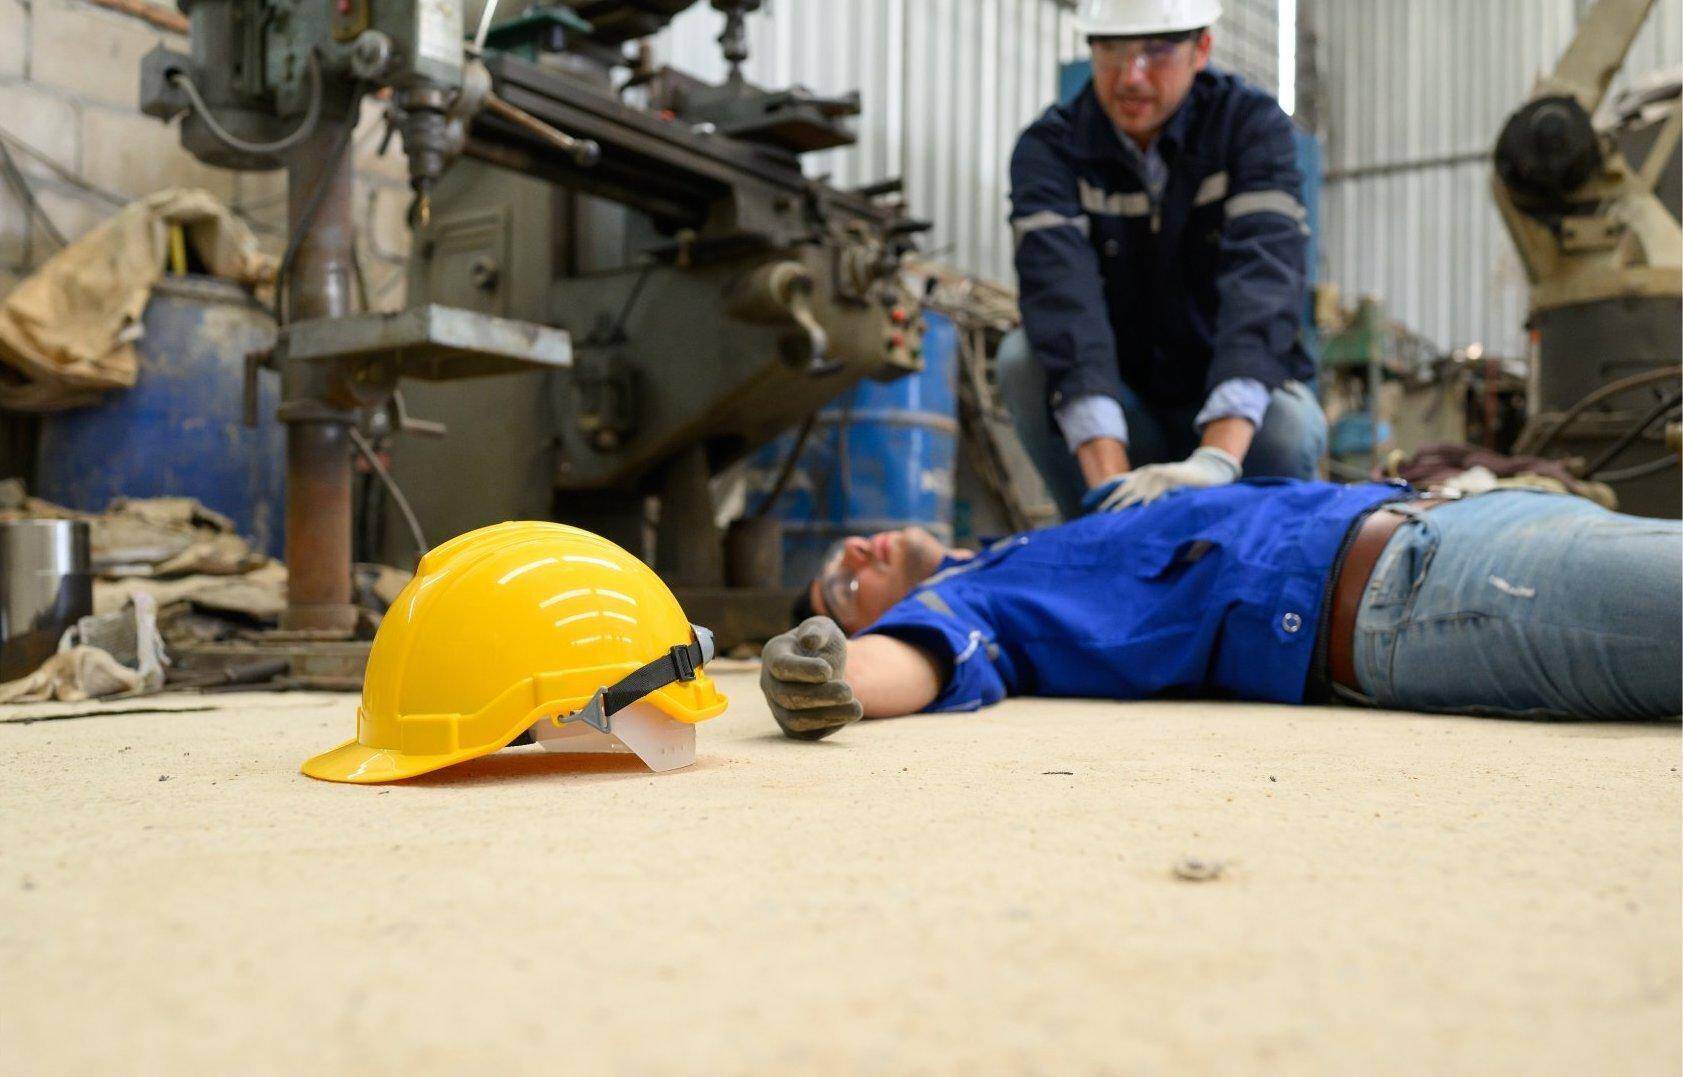 An unconscious man who has been injured on the job who will file for workers compensation in Bainbridge, Georgia